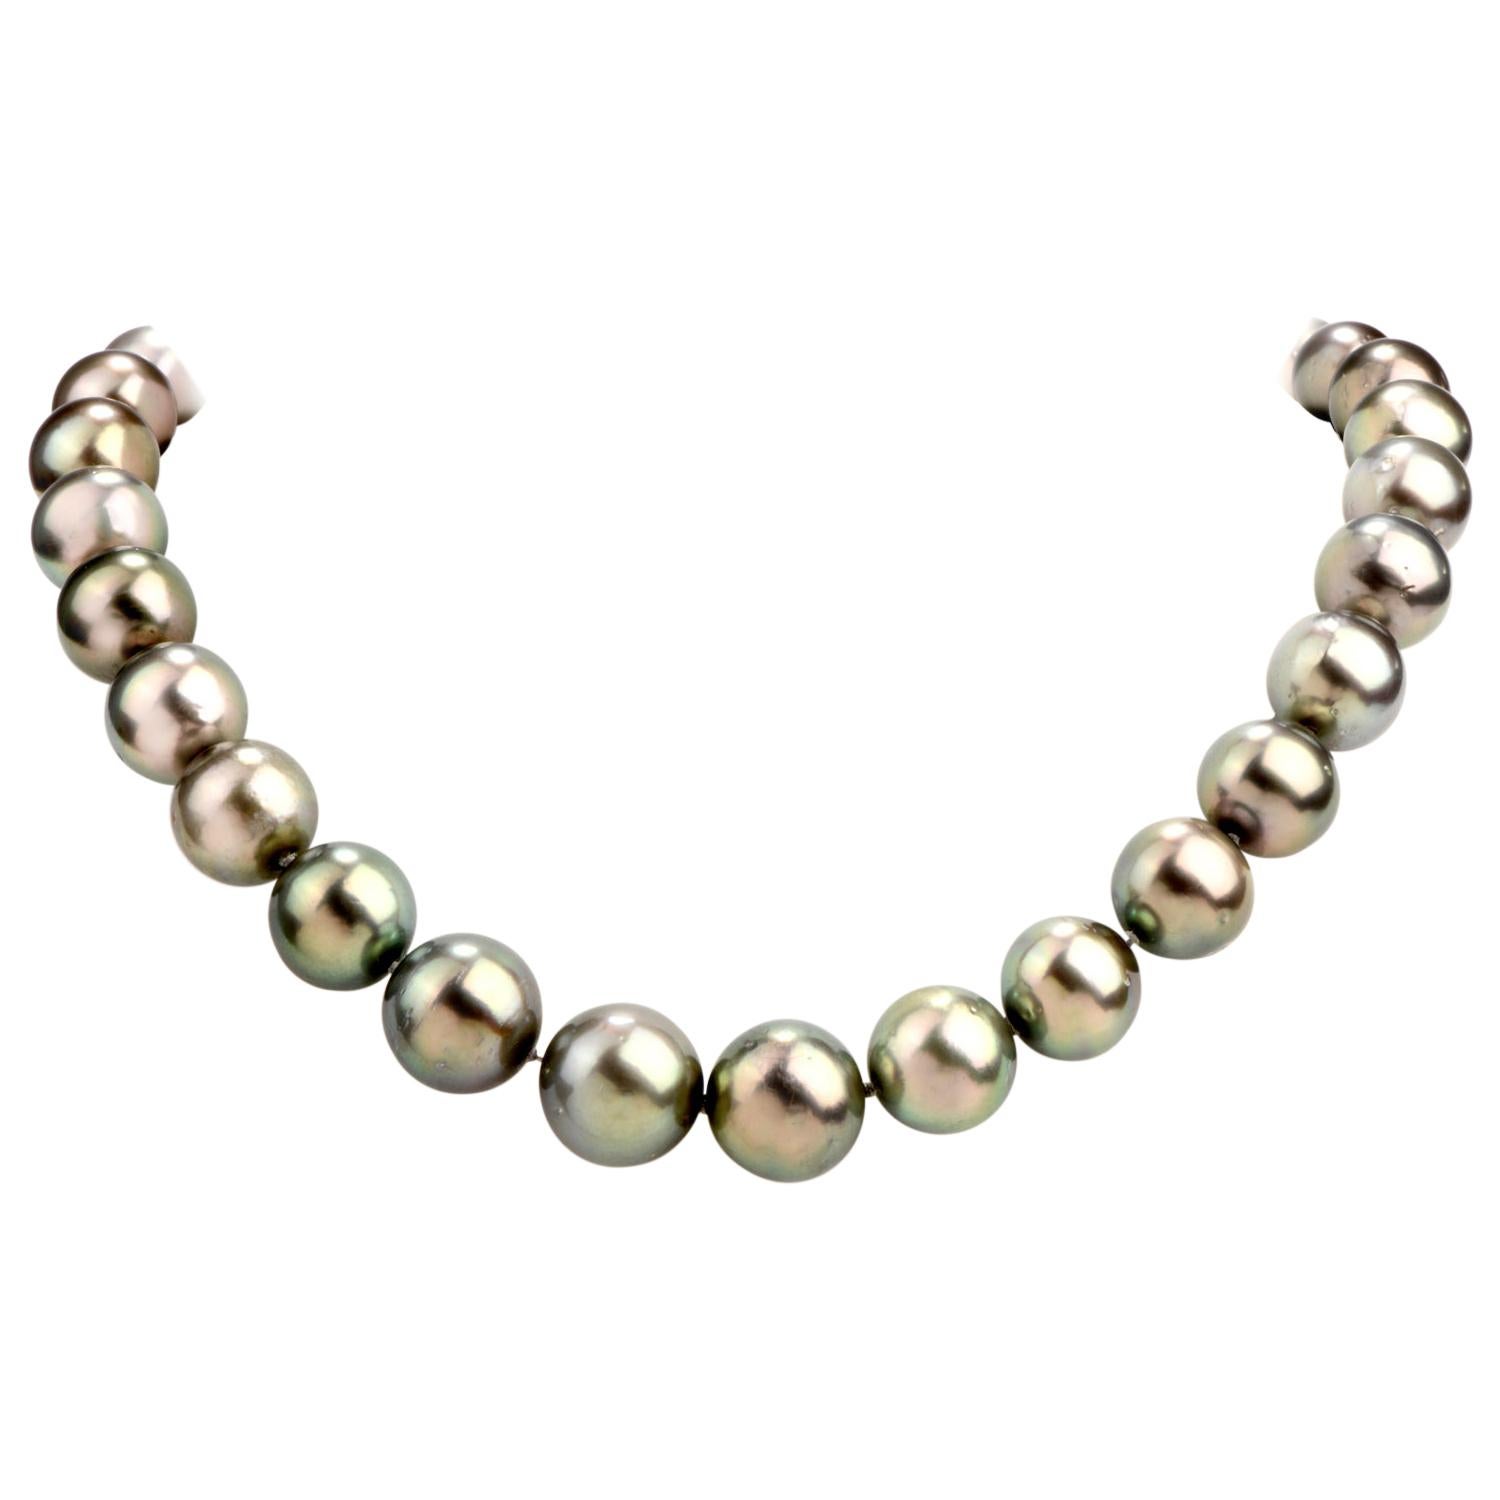 RARE High TAHITIAN PEARL NECKLACE WITH PENDANT 20inch 